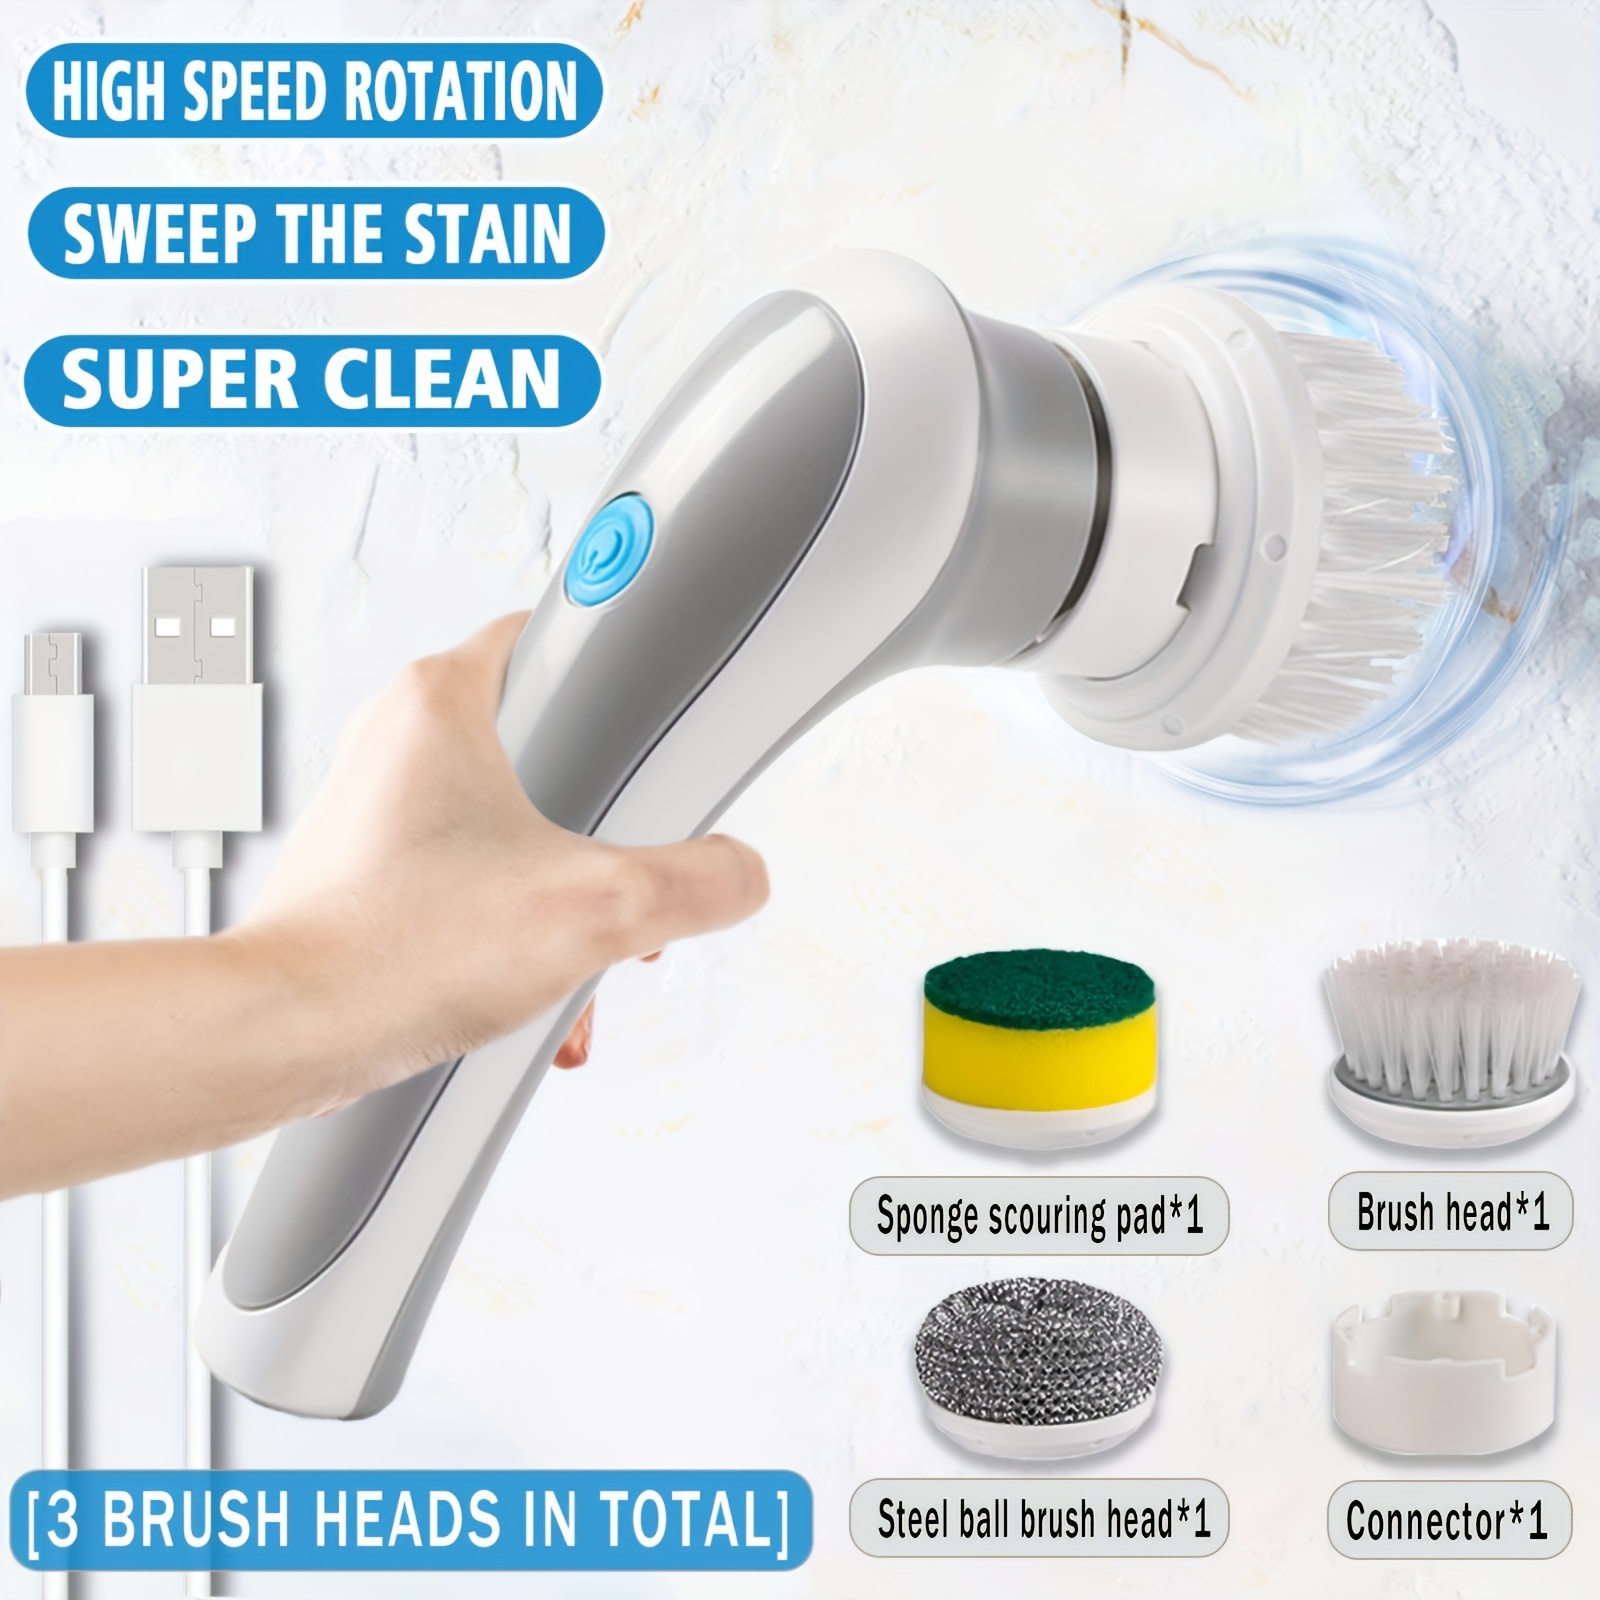 3-in-1 Electric Brush Cleaner Bathroom Wash Brush Cleanng Brush